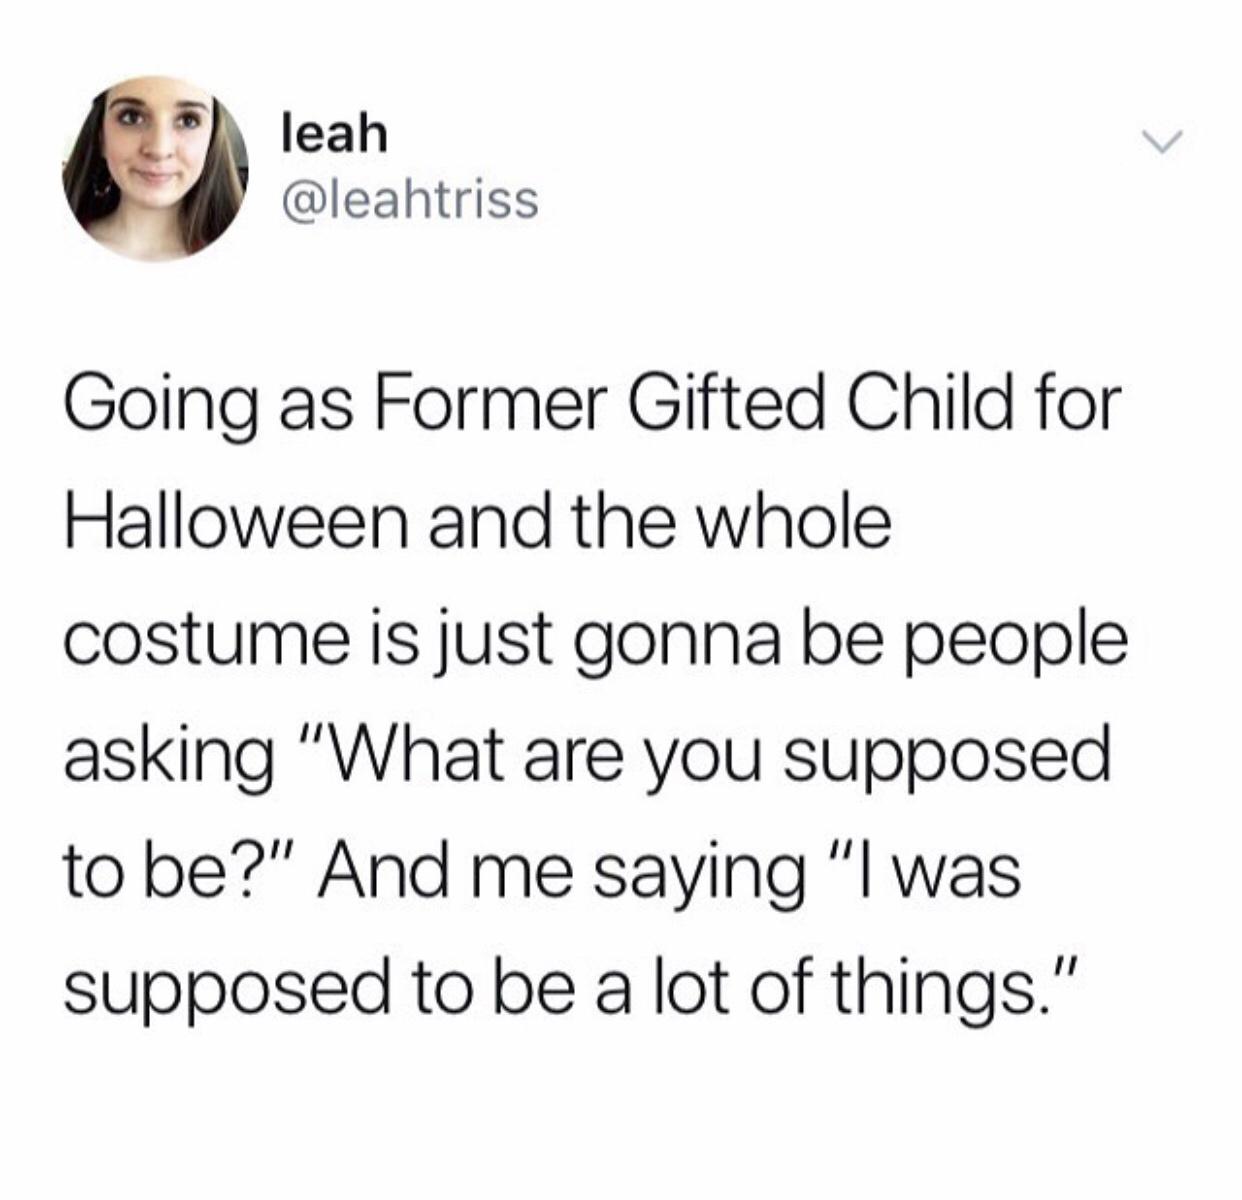 dank memes - leah Going as Former Gifted Child for Halloween and the whole costume is just gonna be people asking "What are you supposed to be?" And me saying "I was supposed to be a lot of things."